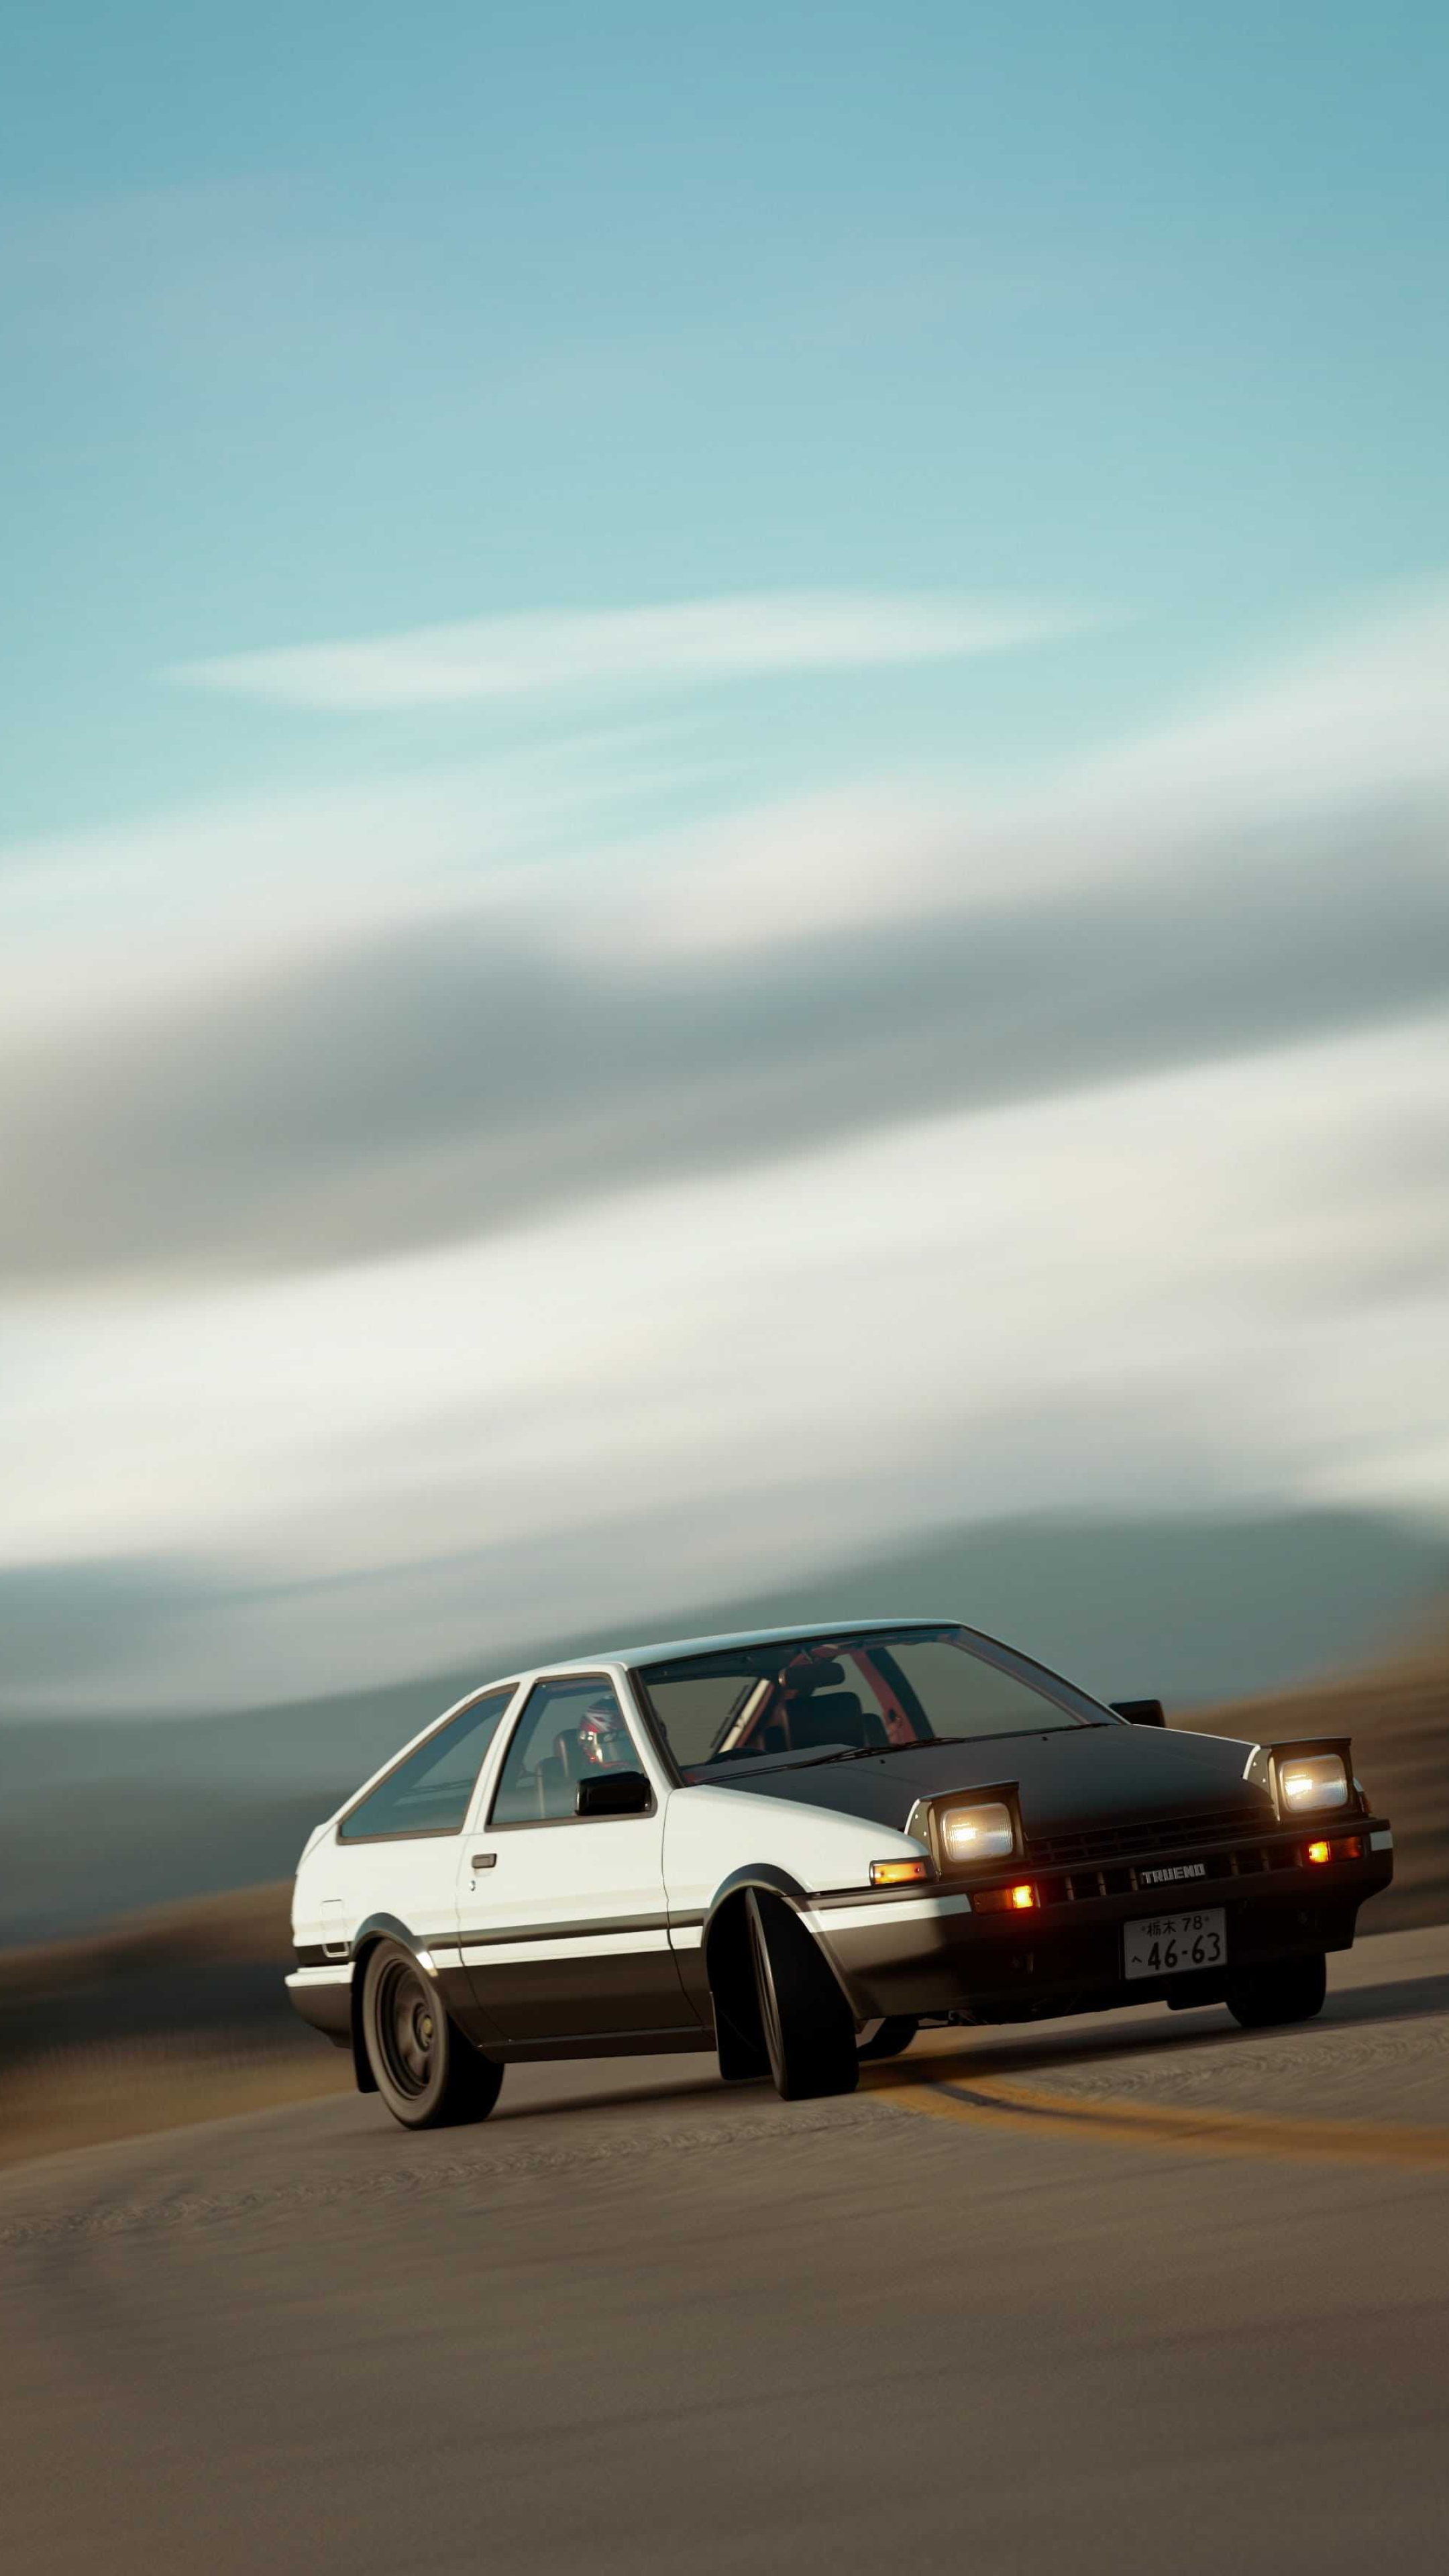 Initial D Anime, Racing anime wallpaper, Speed thrills, Heart-pounding action, 2160x3840 4K Phone